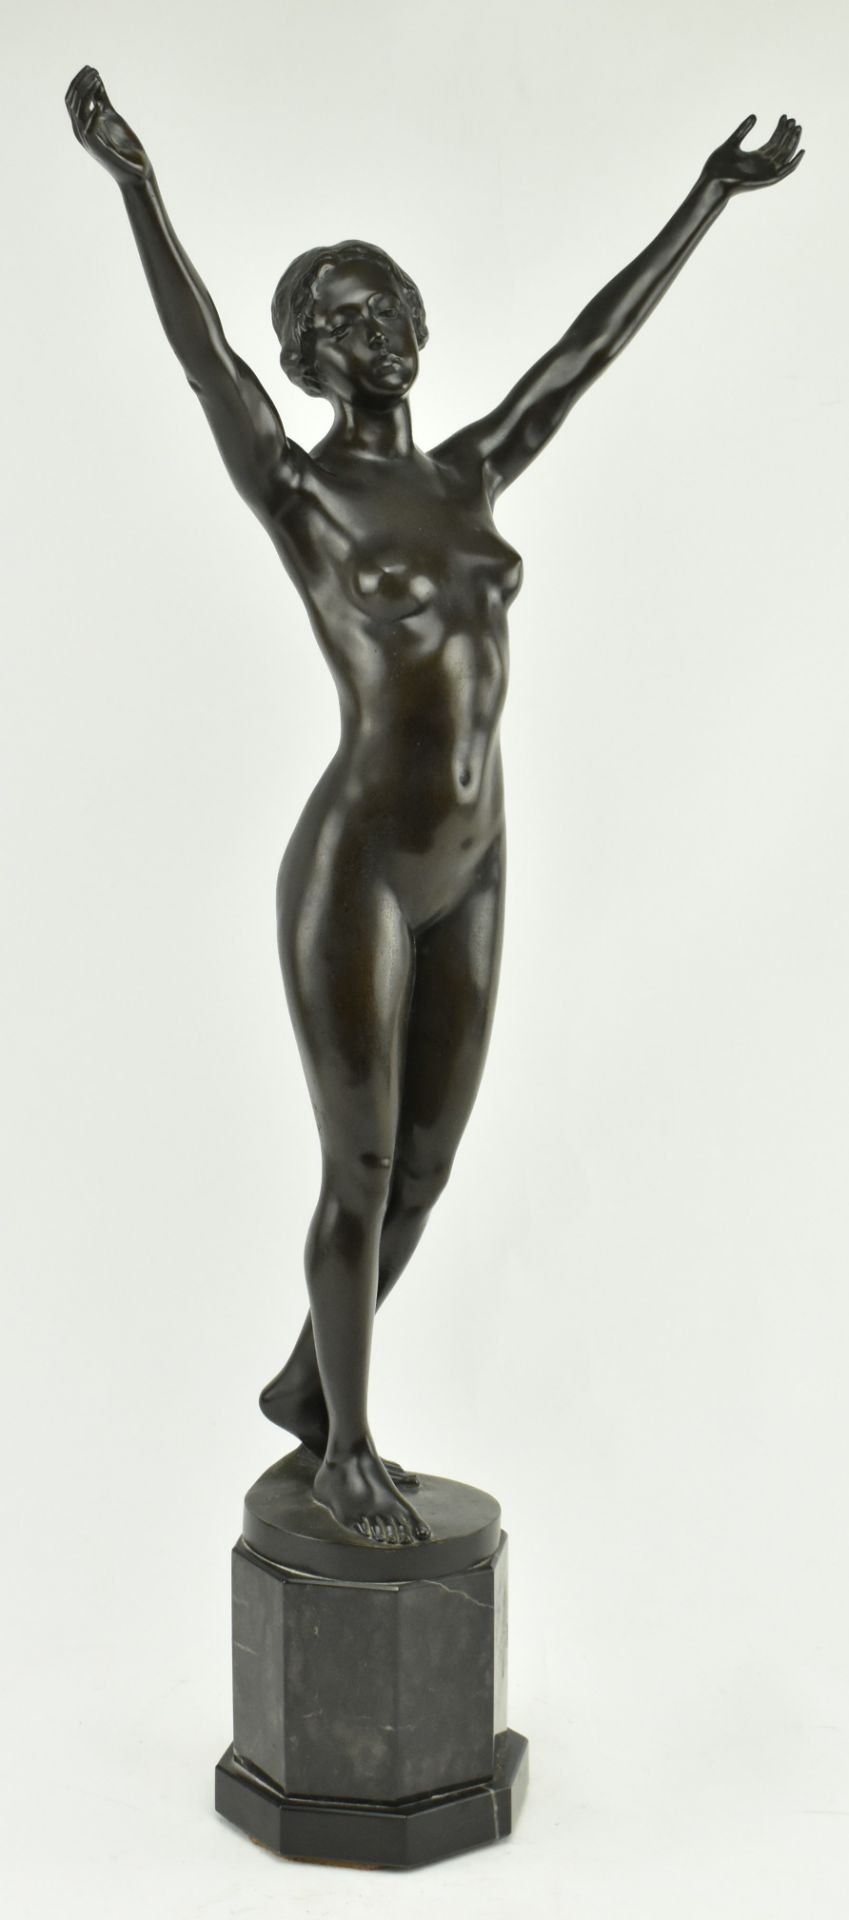 AFTER PAUL AICHELE (1859-1920) - BRONZE SCULPTURE OF LADY